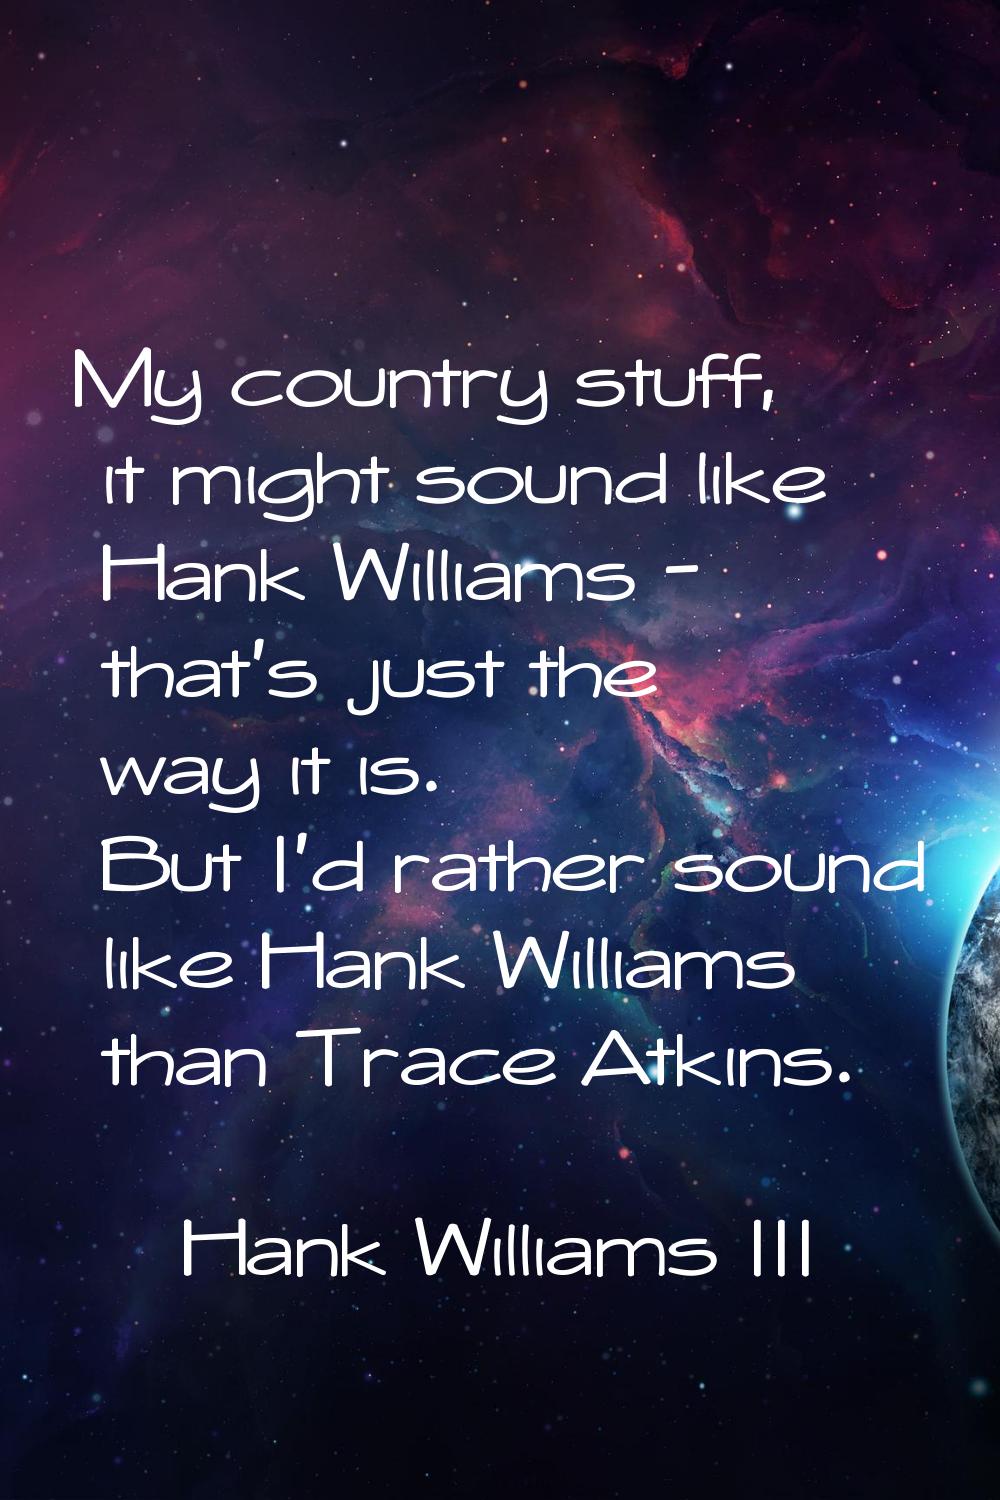 My country stuff, it might sound like Hank Williams - that's just the way it is. But I'd rather sou